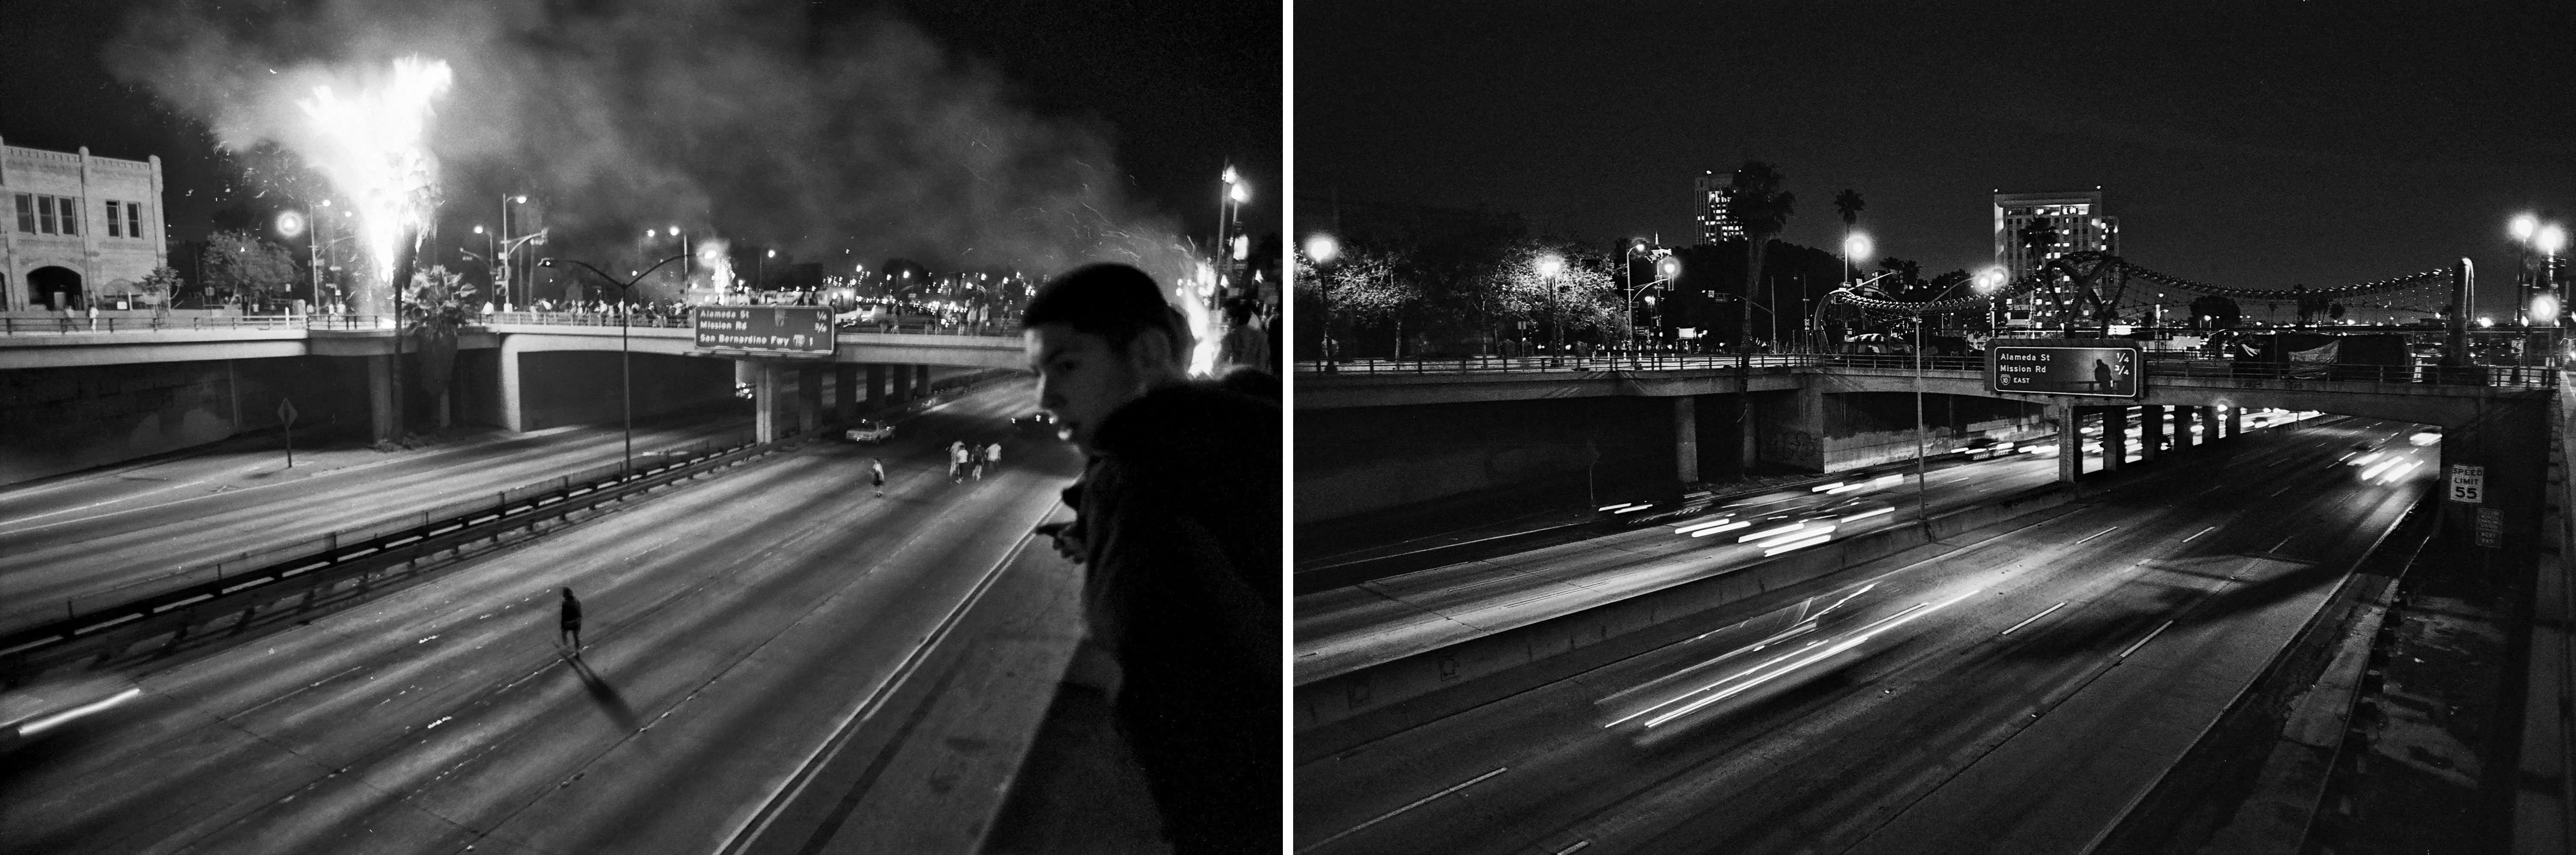 Two pictures are shown side by side: On the left, man is seen walking down the middle of the highway; on the right, the same highway is seen with cars moving normally .